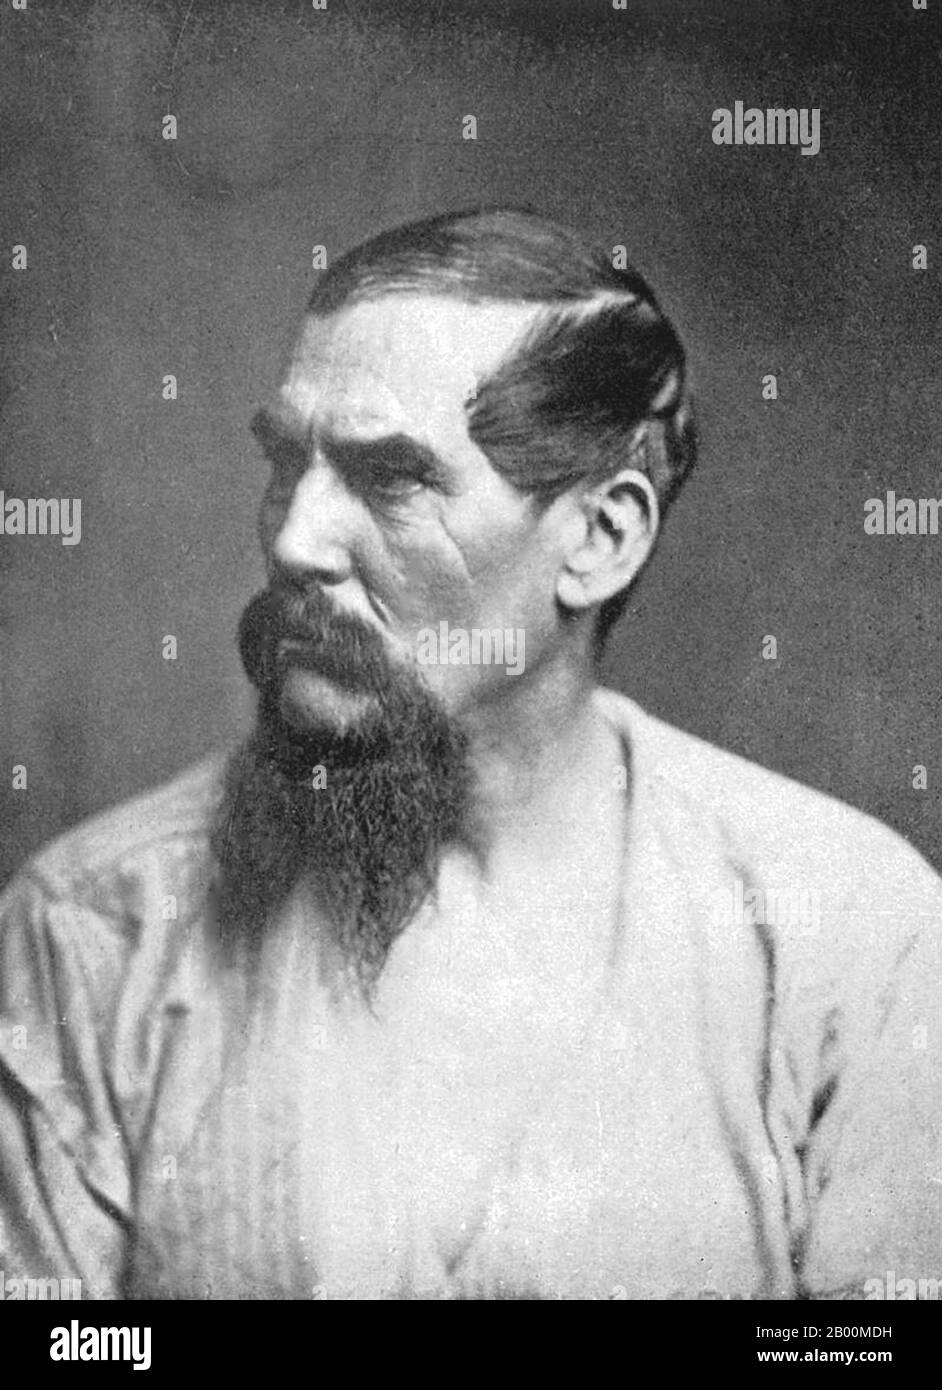 UK: Sir Richard Francis Burton, 1821-1890, late 20th century.  Captain Sir Richard Francis Burton KCMG FRGS (19 March 1821 – 20 October 1890) was an English explorer, translator, writer, soldier, orientalist, ethnologist, linguist, poet, hypnotist, fencer and diplomat. He was known for his travels and explorations within Asia and Africa as well as his extraordinary knowledge of languages and cultures. Stock Photo